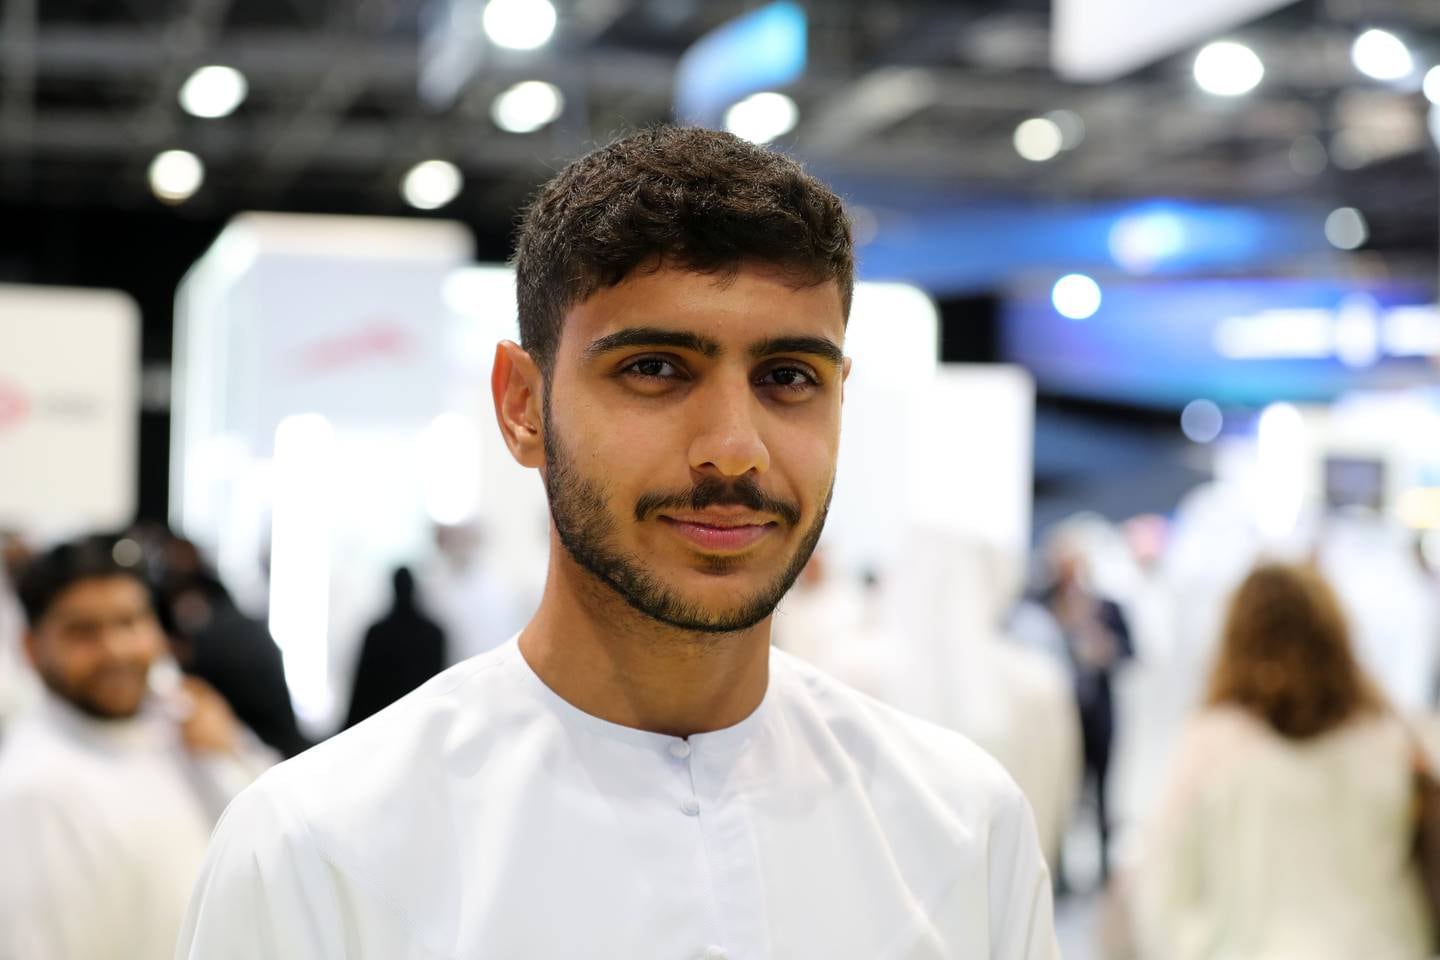 Salem Al Shamsi says working in the private sector will allow him to develop his skills. Photo: Chris Whiteoak / The National